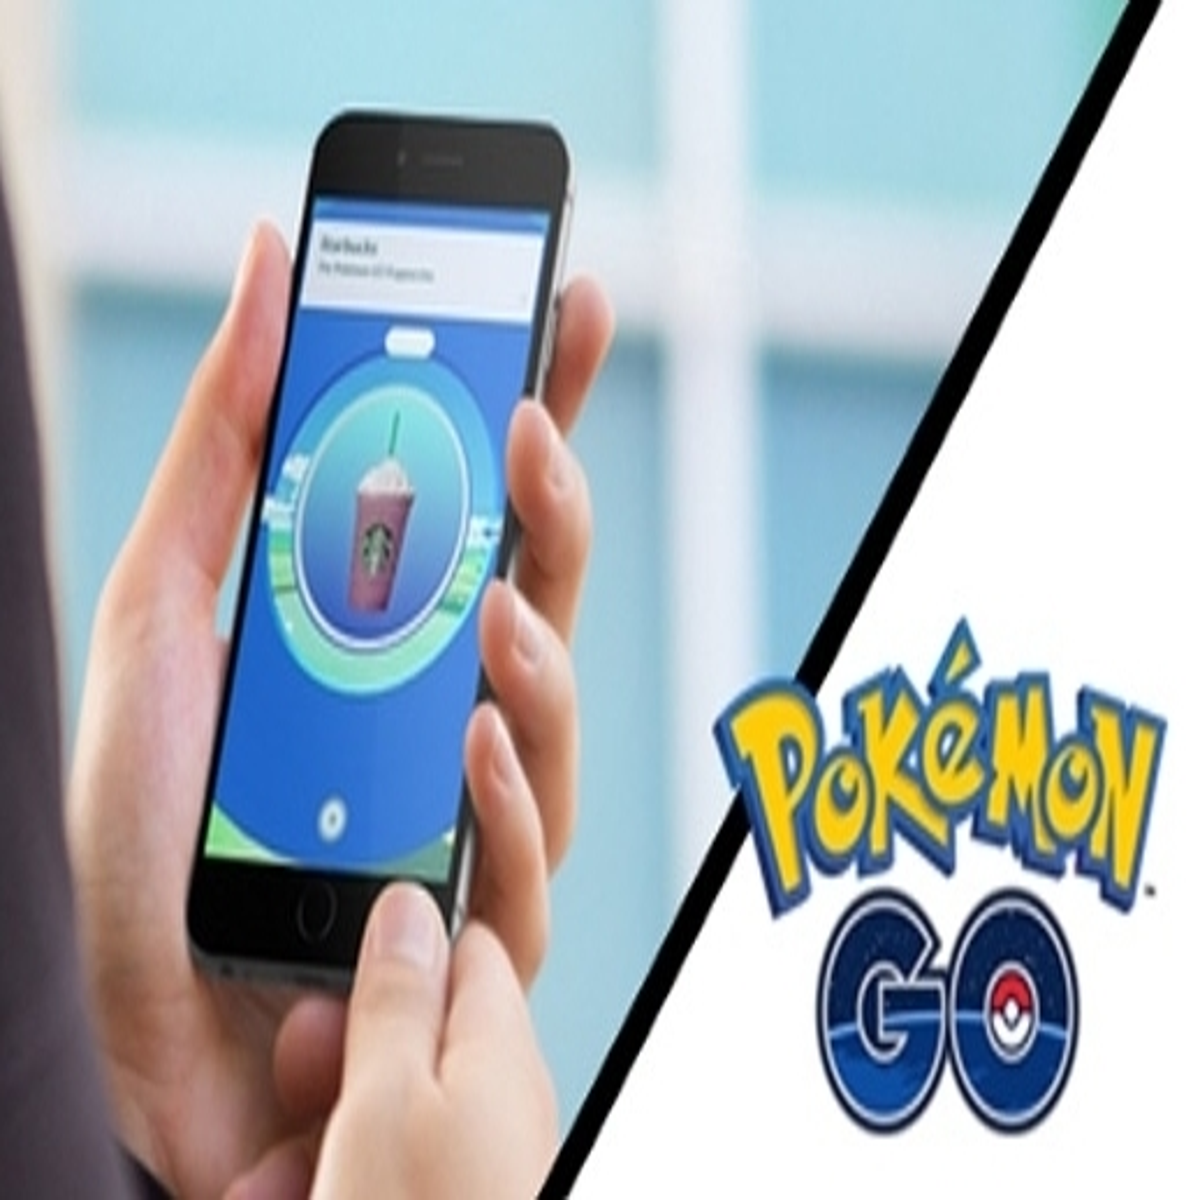 Pokemon Go Cheats & Cheat Codes for iOS and Android - Cheat Code Central